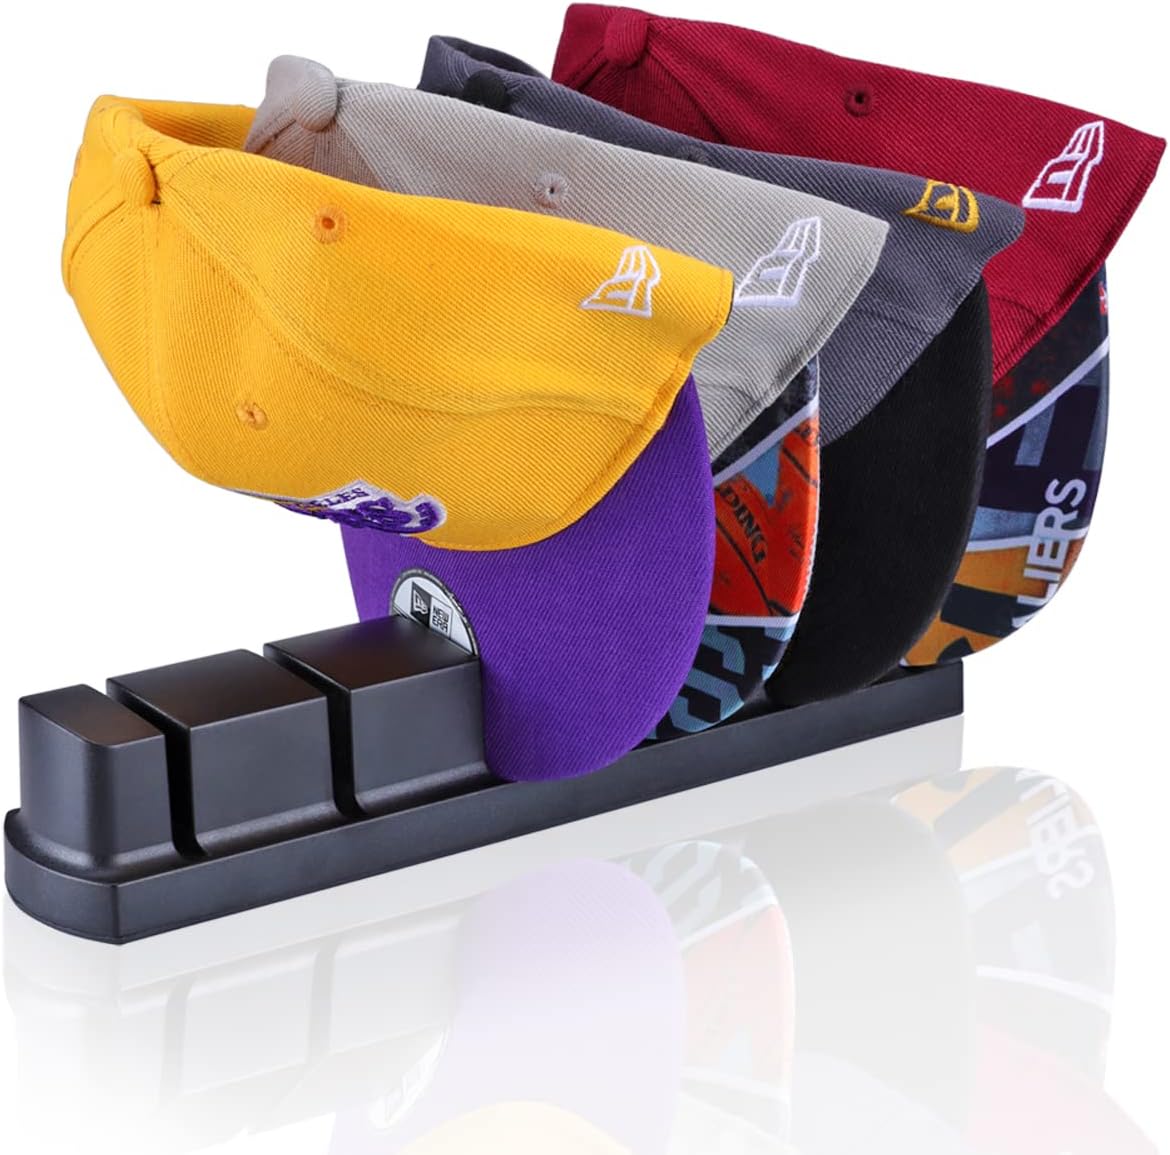 Standing Hat Rack for Fitted Basketball Caps - Storage for up to 6 hats - Free Standing - EZB